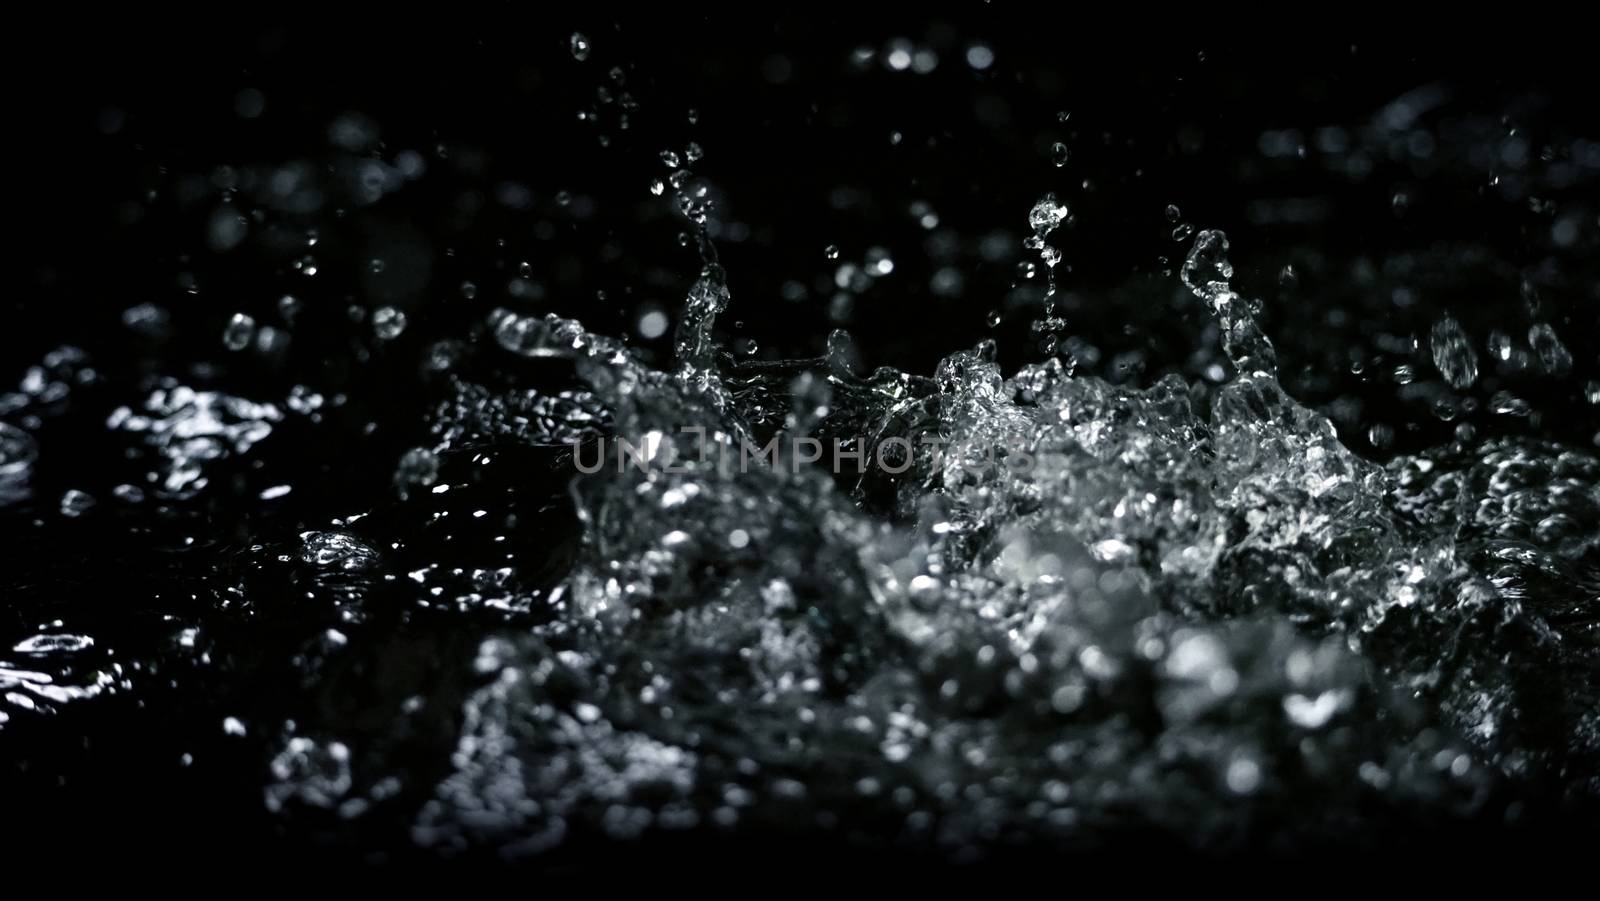 Blurry images of drinking water liquid wave splashing by gnepphoto